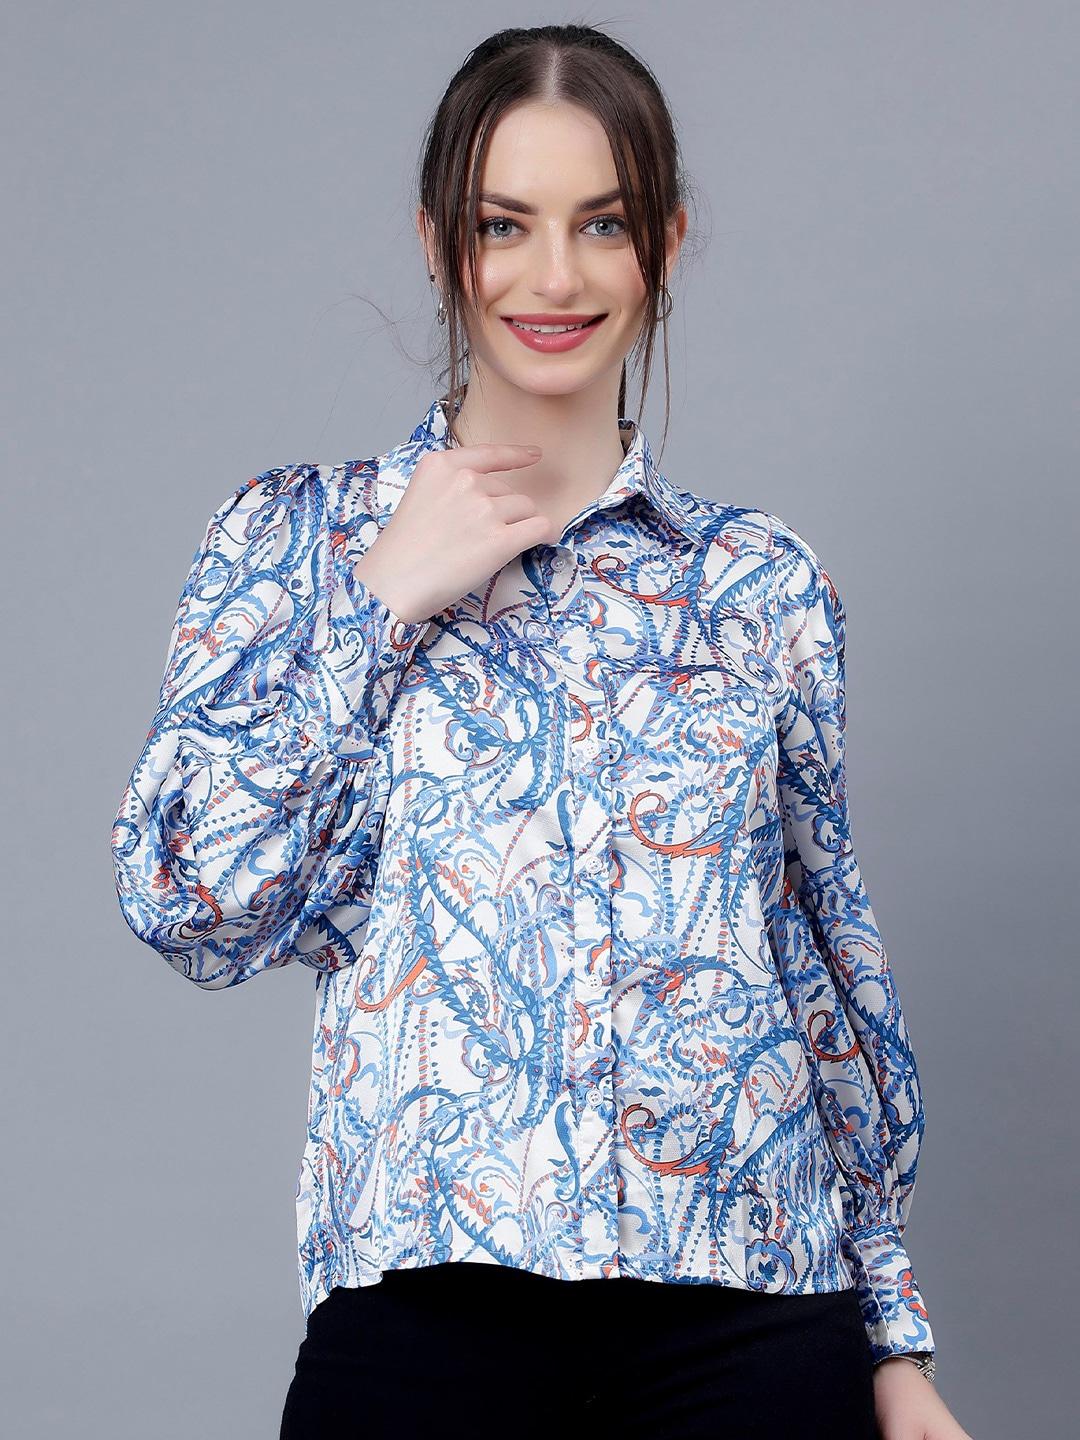 albion ethnic motifs printed shirt style top